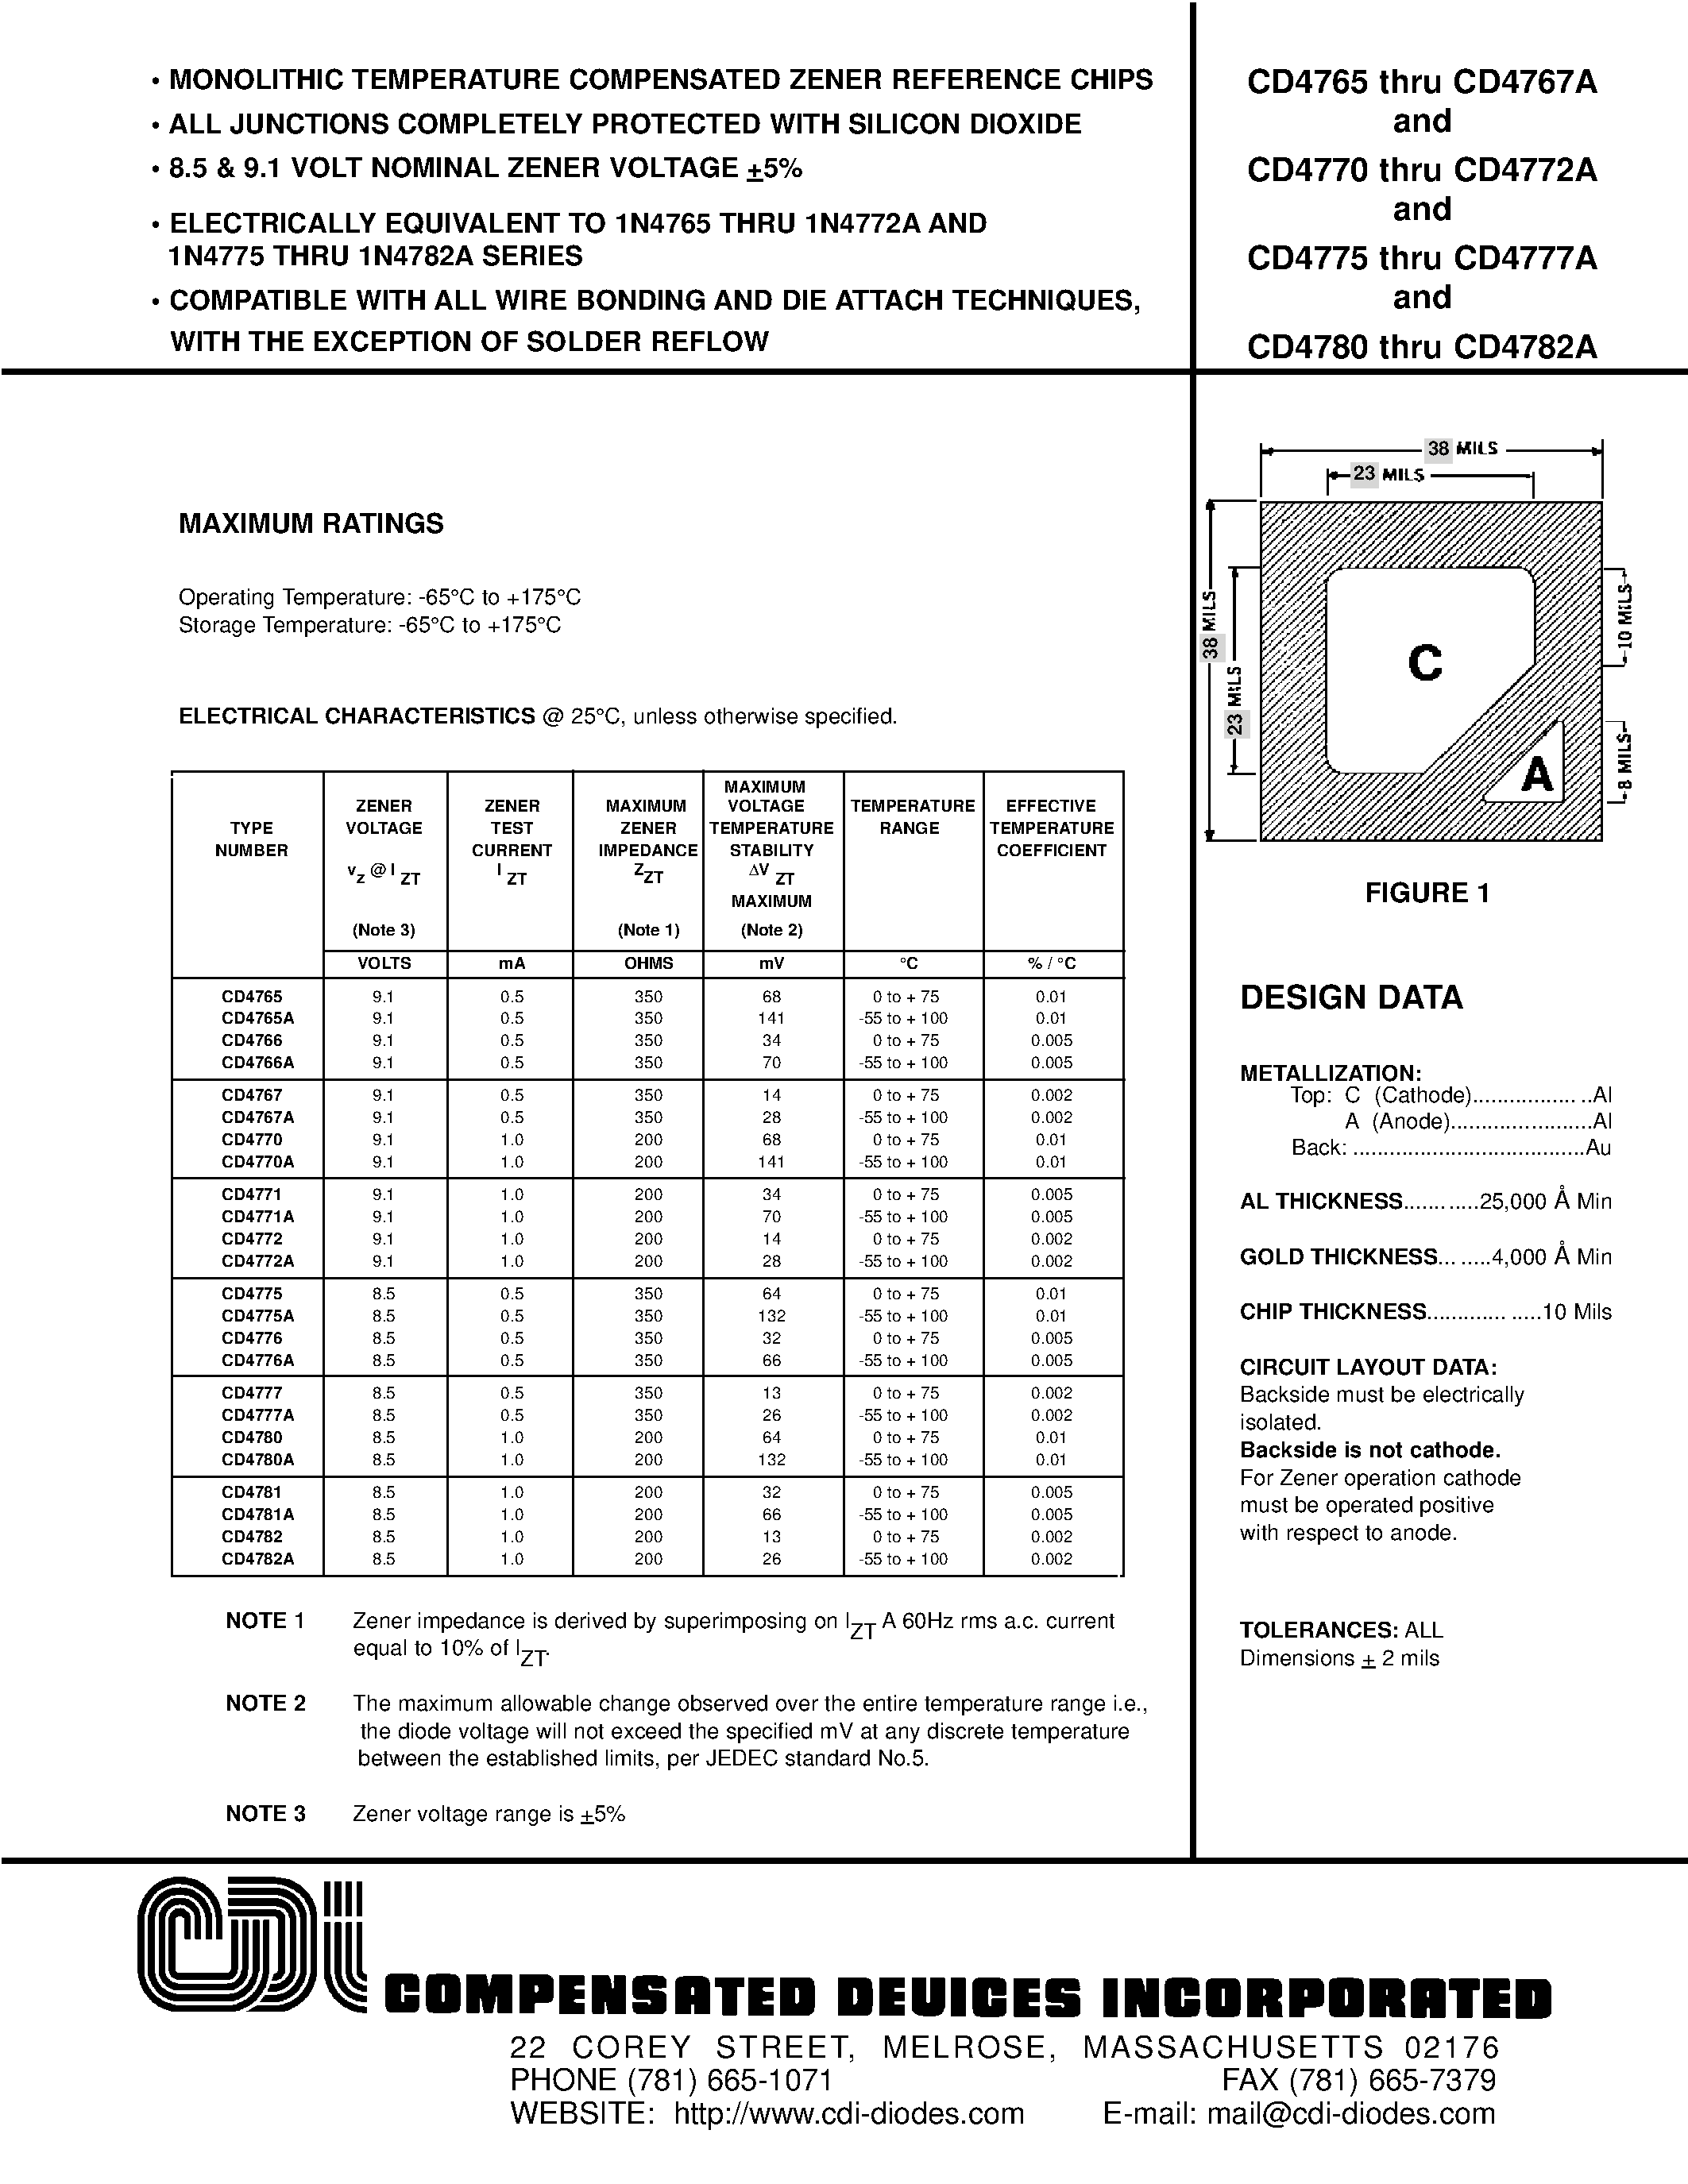 Datasheet CD4771A - MONOLITHIC TEMPERATURE COMPENSATED ZENER REFERENCE CHIPS page 1